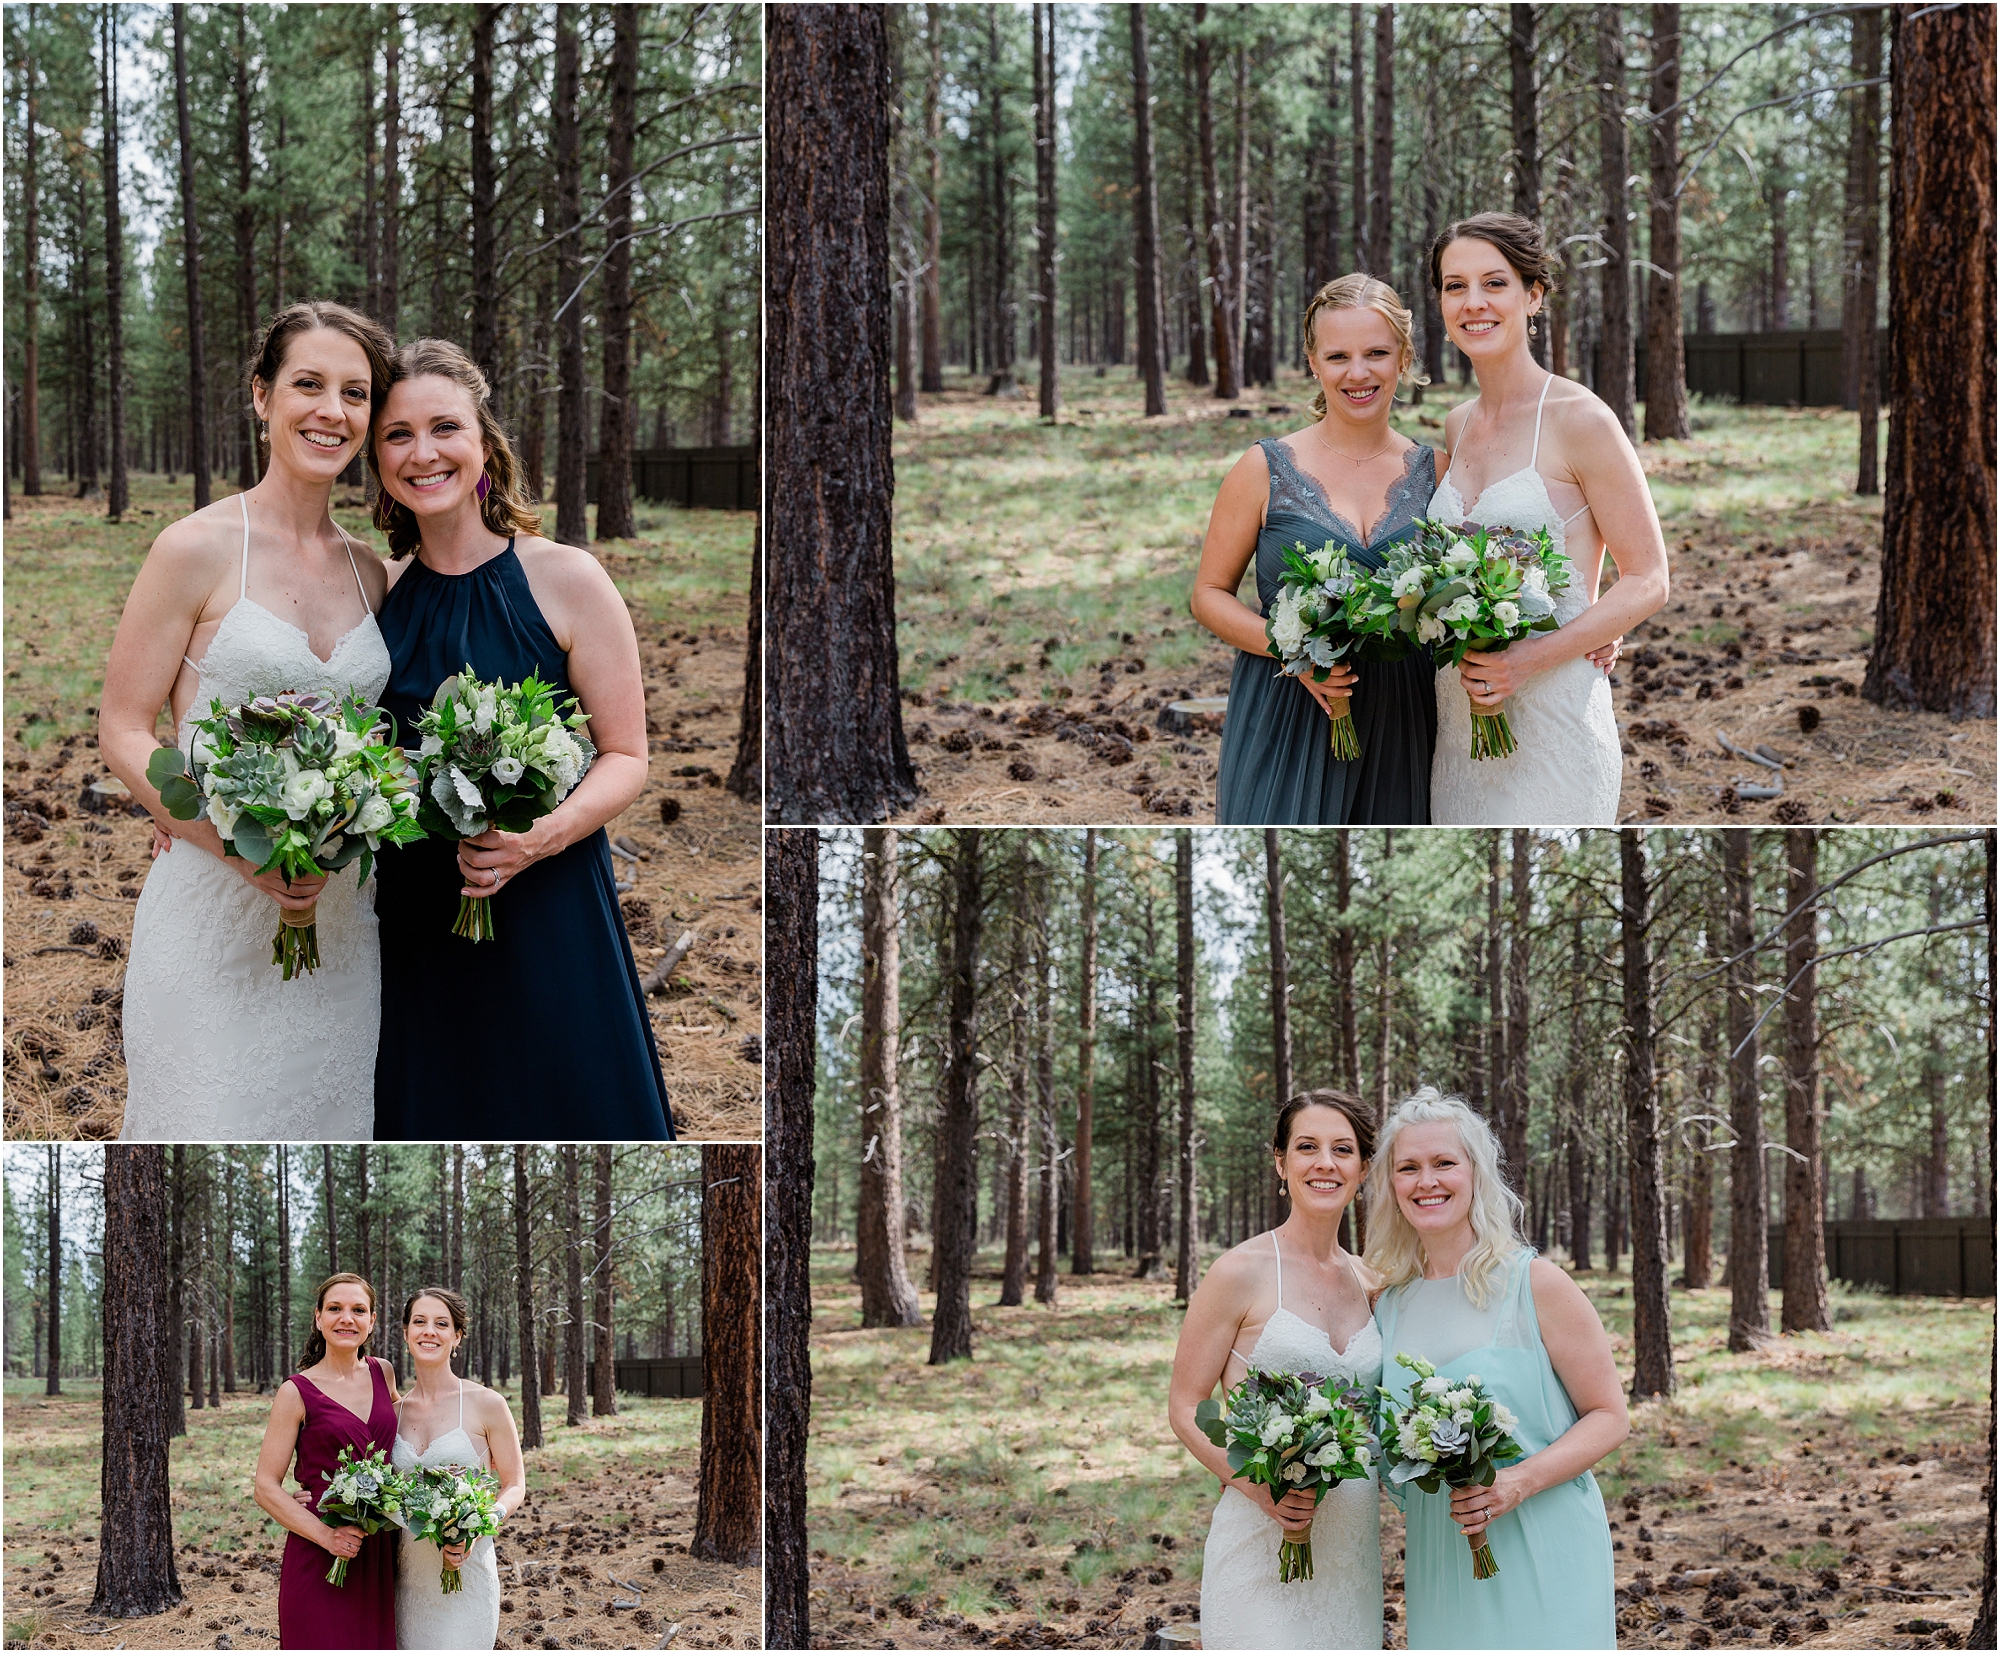 The bridesmaids all wore gowns of their choosing with one in navy, one in mint, one in a dusty blue and one in cranberry. All of their bouquets were created with succulents. | Erica Swantek Photography